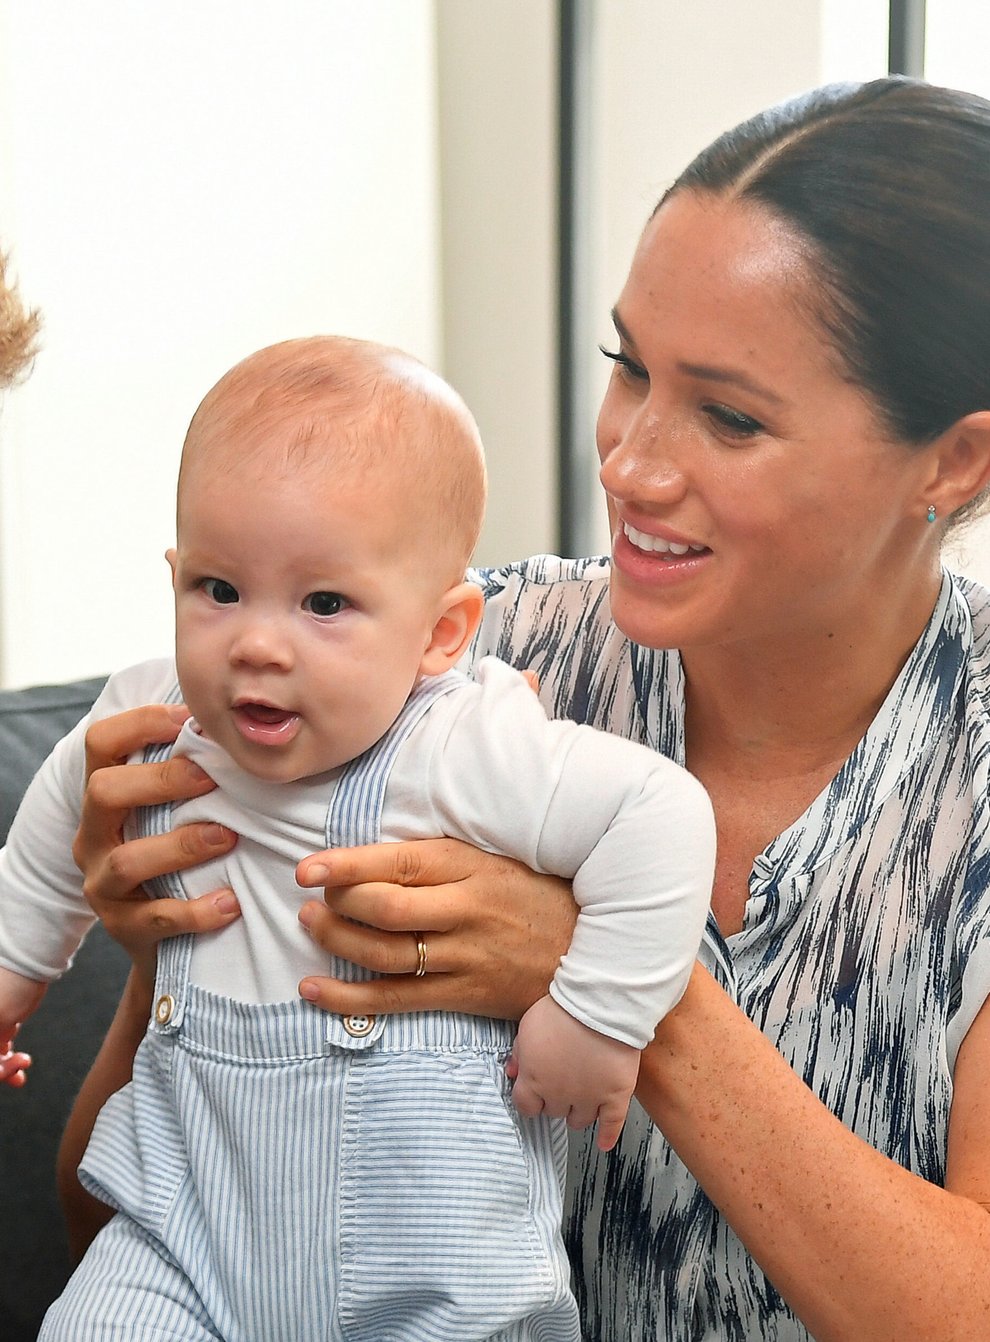 File photo dated 25/09/2019 of the Duke and Duchess of Sussex holding their son Archie during a meeting with Archbishop Desmond Tutu. The Duchess of Sussex gave birth to a 7lb 11oz daughter, Lilibet “Lili” Diana Mountbatten-Windsor, on Friday in California and both mother and child are healthy and well, Meghan’s press secretary said. (PA)